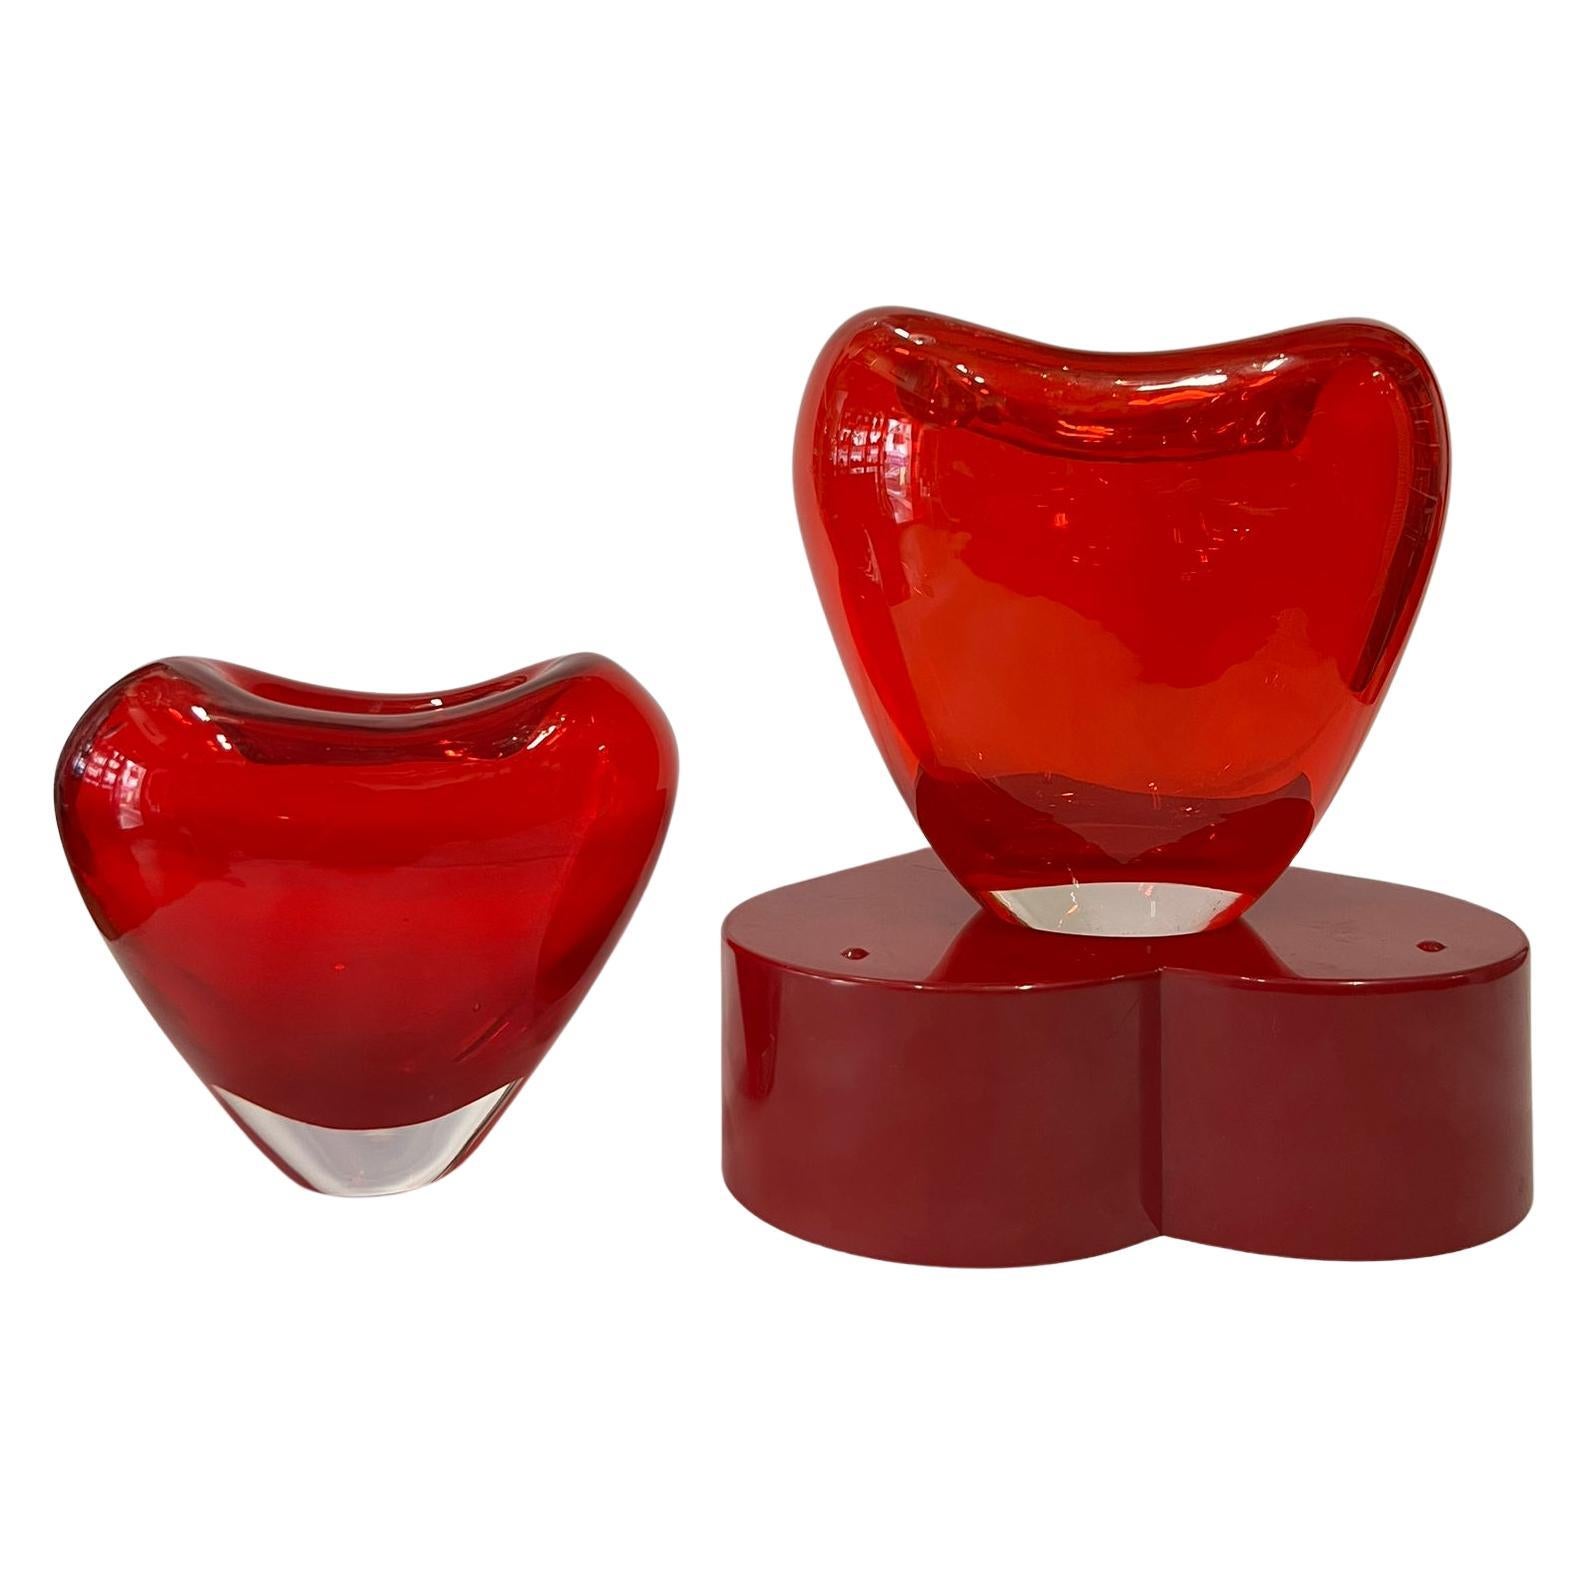 Two Murano glass heart vase by Maria Christina Hamel, 1990s, good original condition.

Dimensions large heart:
Height: 16.5 cm
Width: 16 cm
Depth: 12 cm

Dimensions small heart:
Height: 13 cm
Width: 15.5 cm
Depth: 10 cm